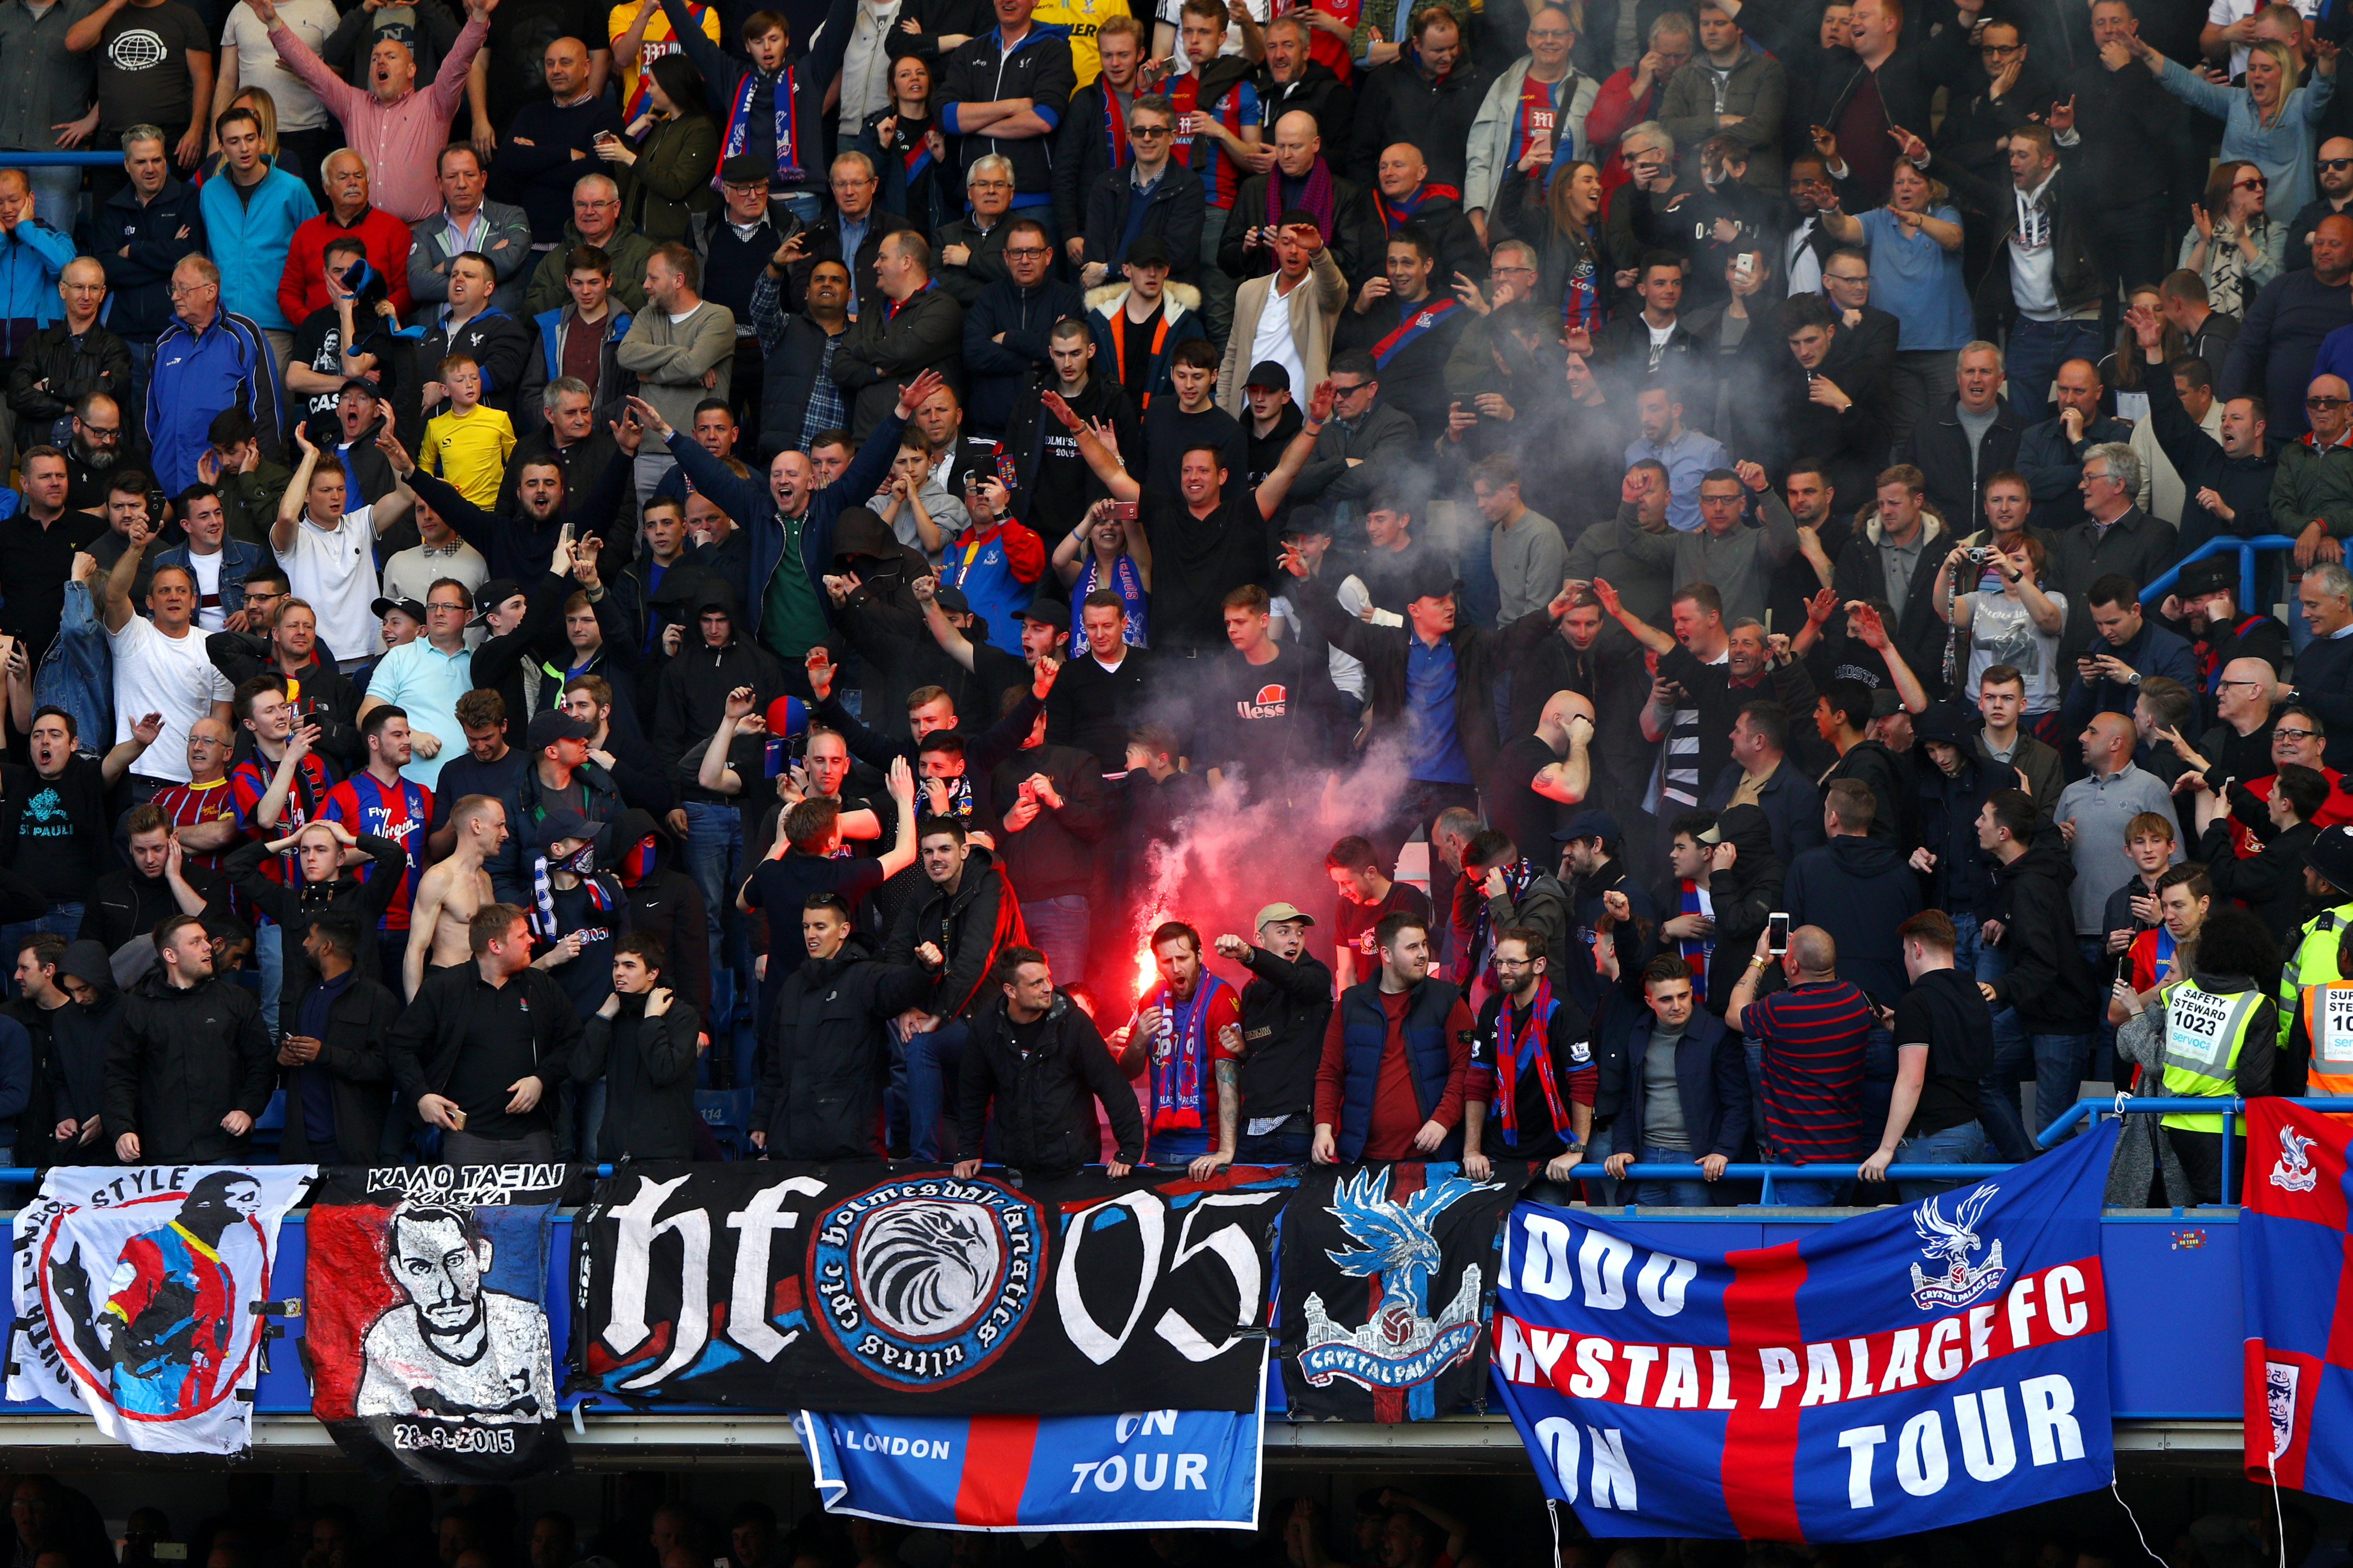 LONDON, ENGLAND - APRIL 01: Crystal Palace fans celebrate during the Premier League match between Chelsea and Crystal Palace at Stamford Bridge on April 1, 2017 in London, England.  (Photo by Ian Walton/Getty Images)